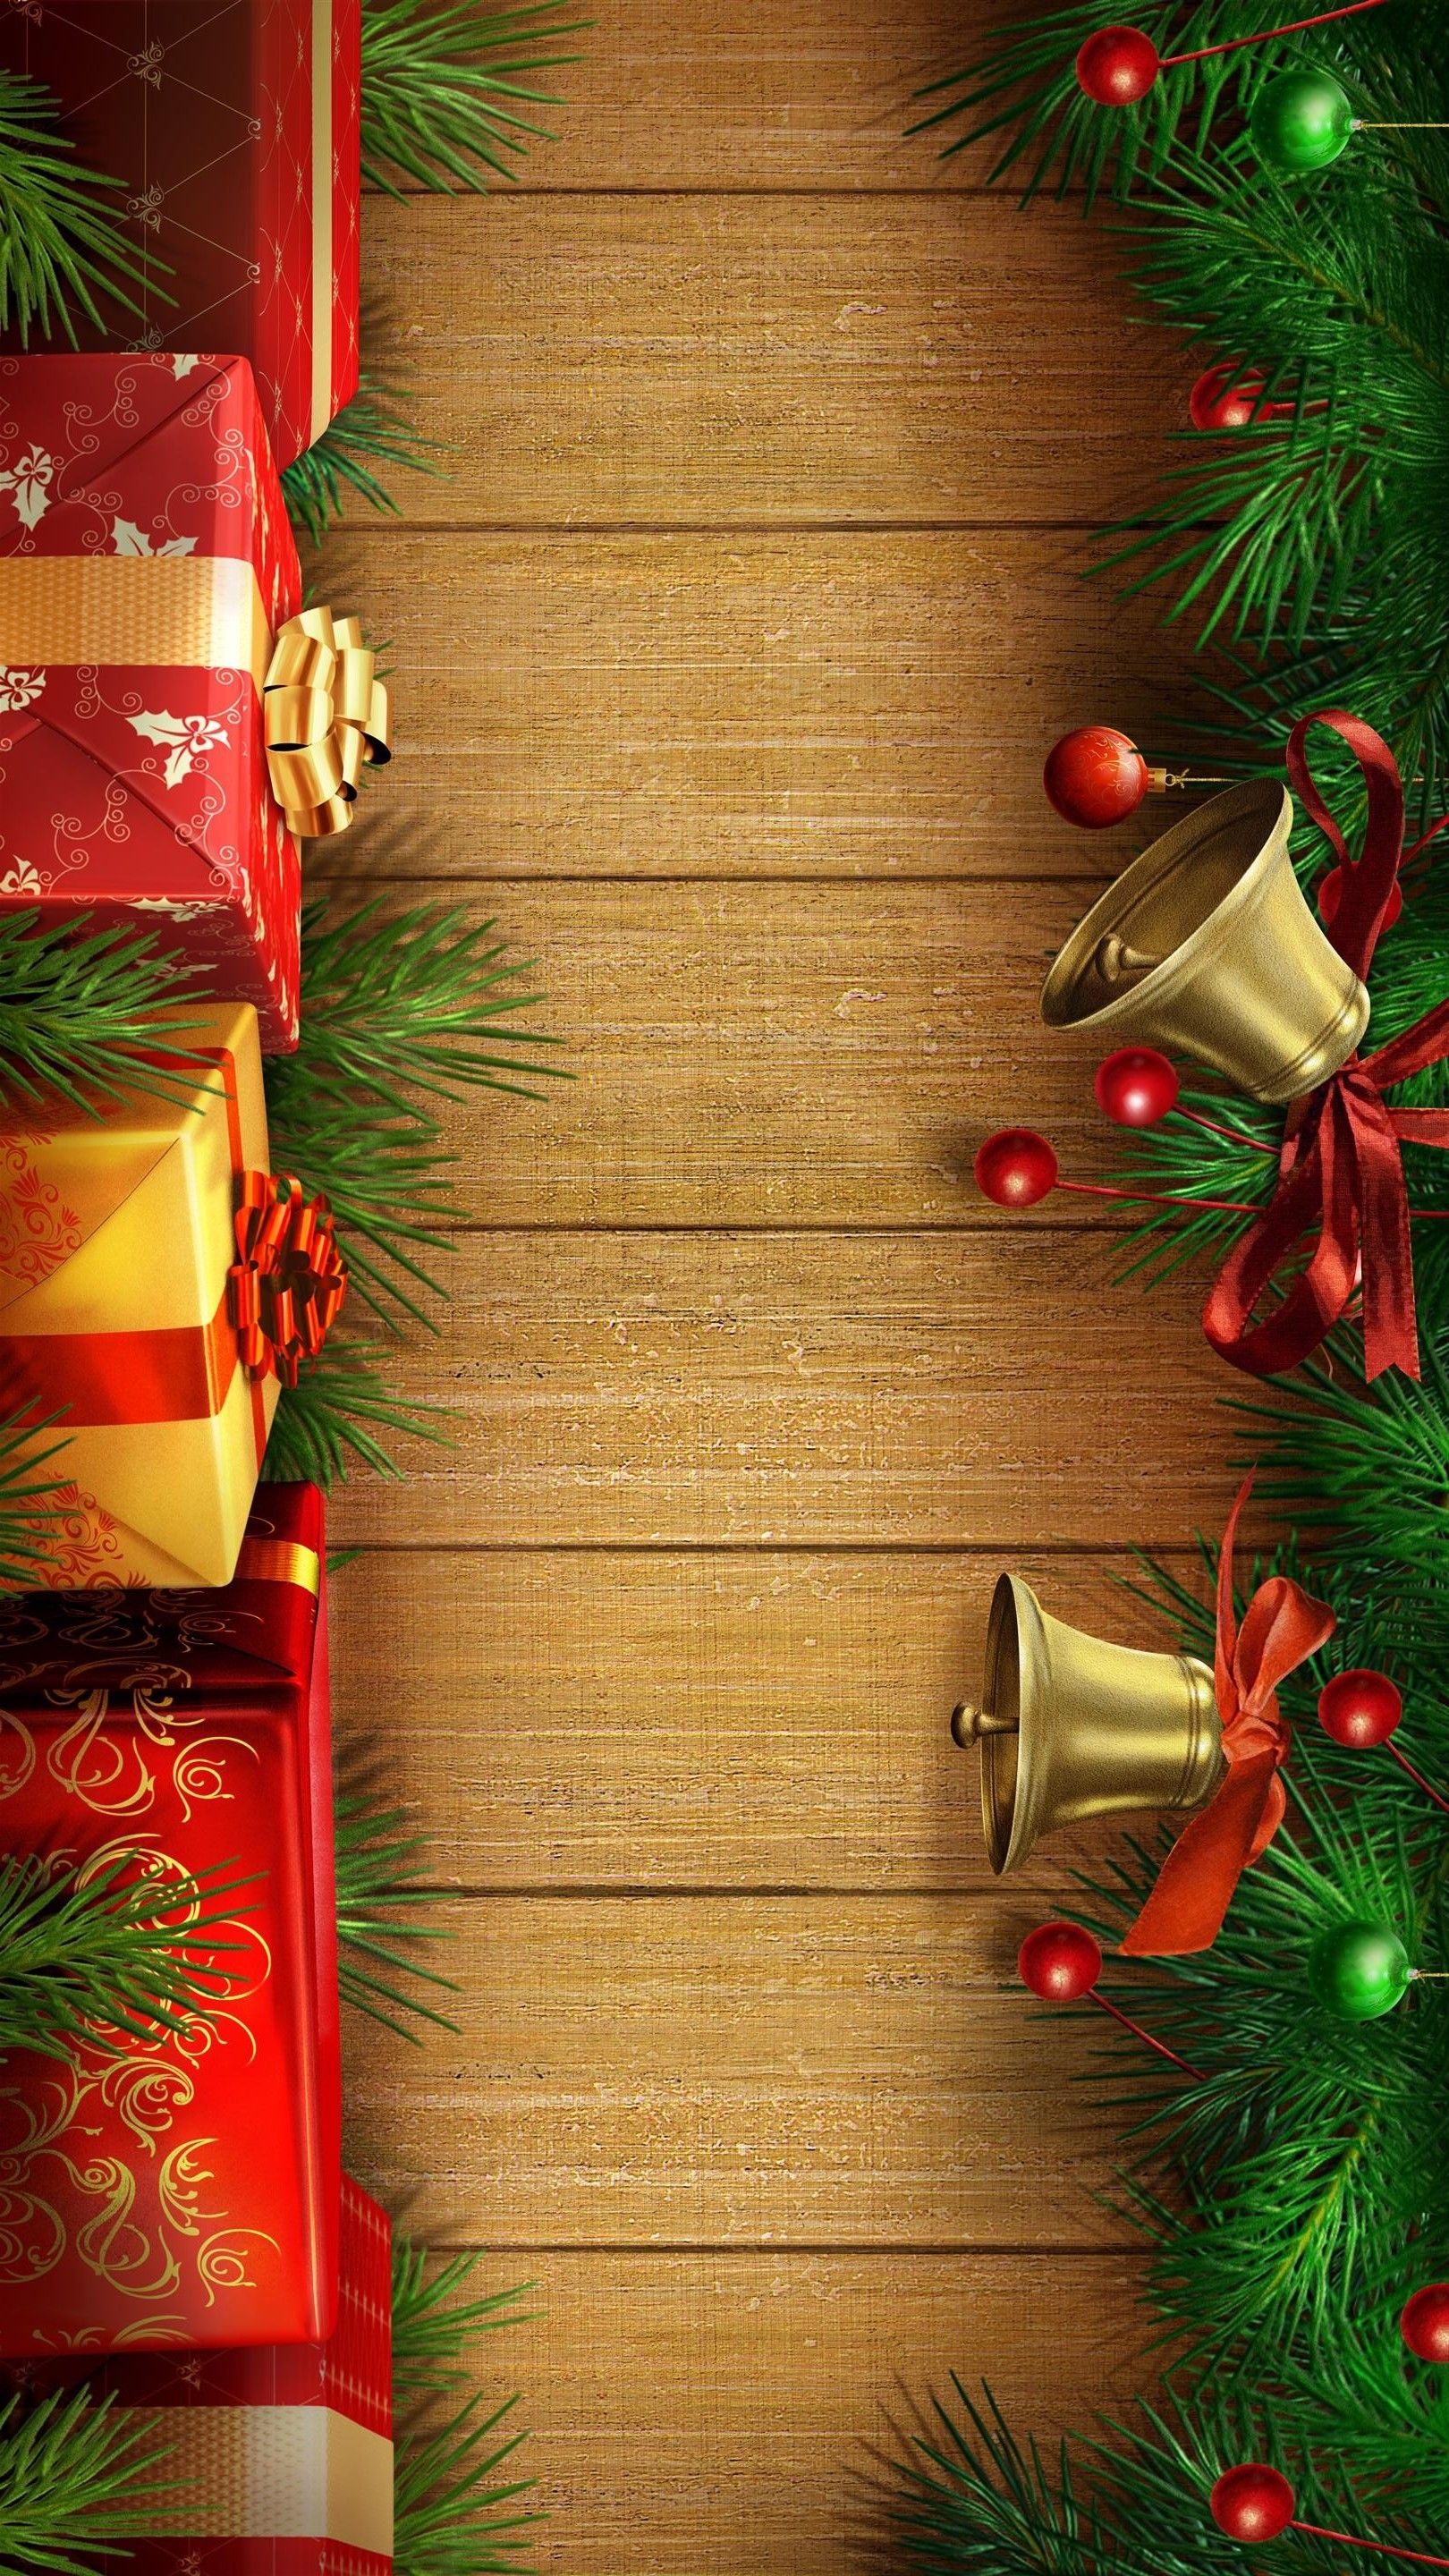 Christmas Presents and Decorations iPhone 5 Wallpaper HD